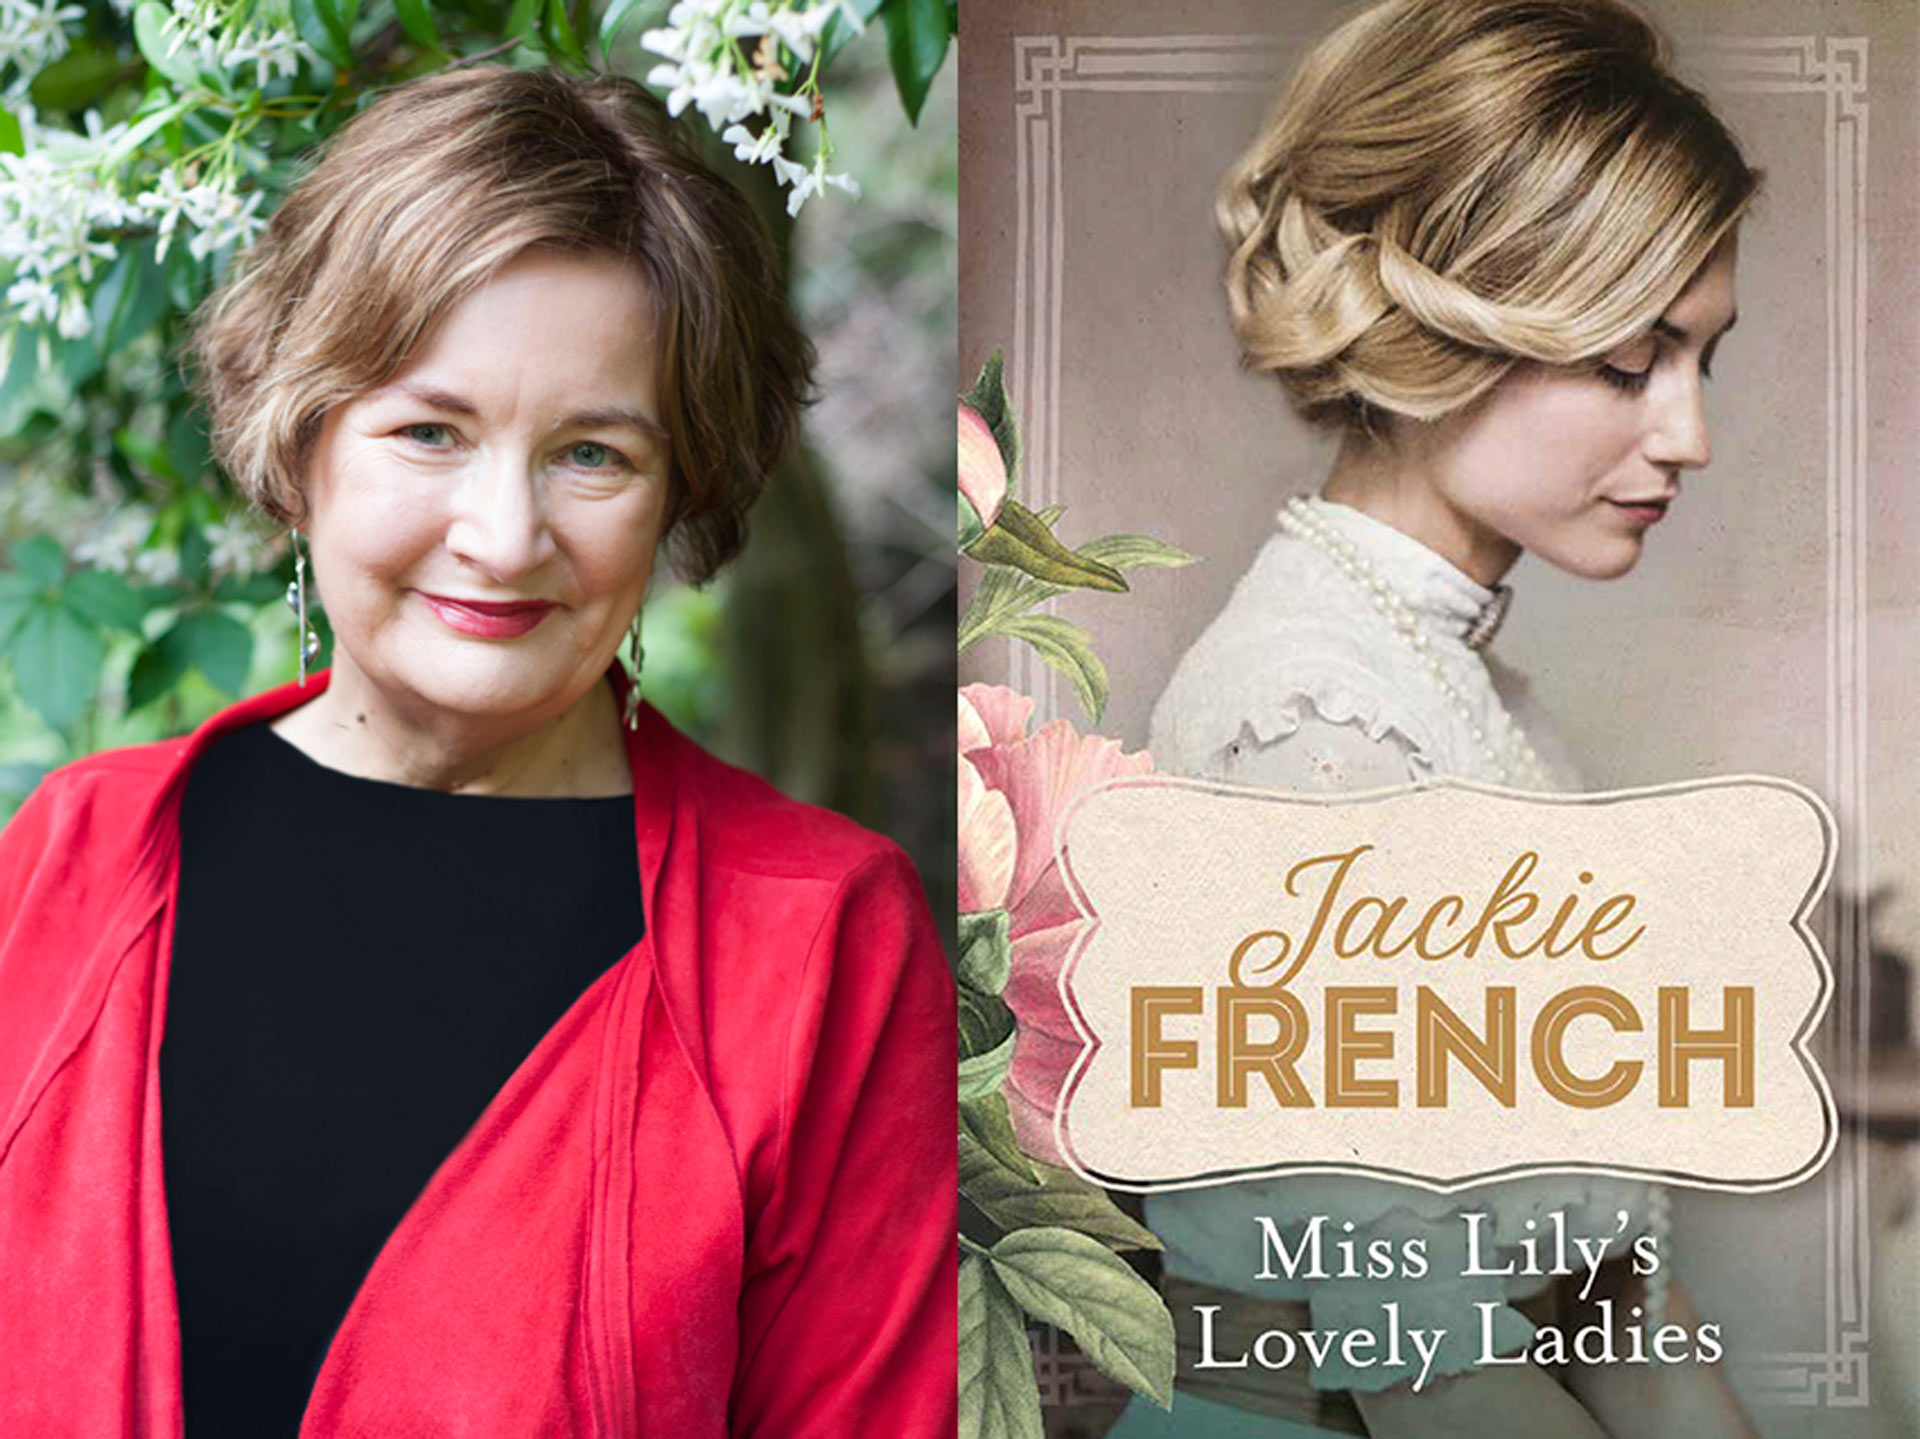 jackie french miss lily's lovely ladies